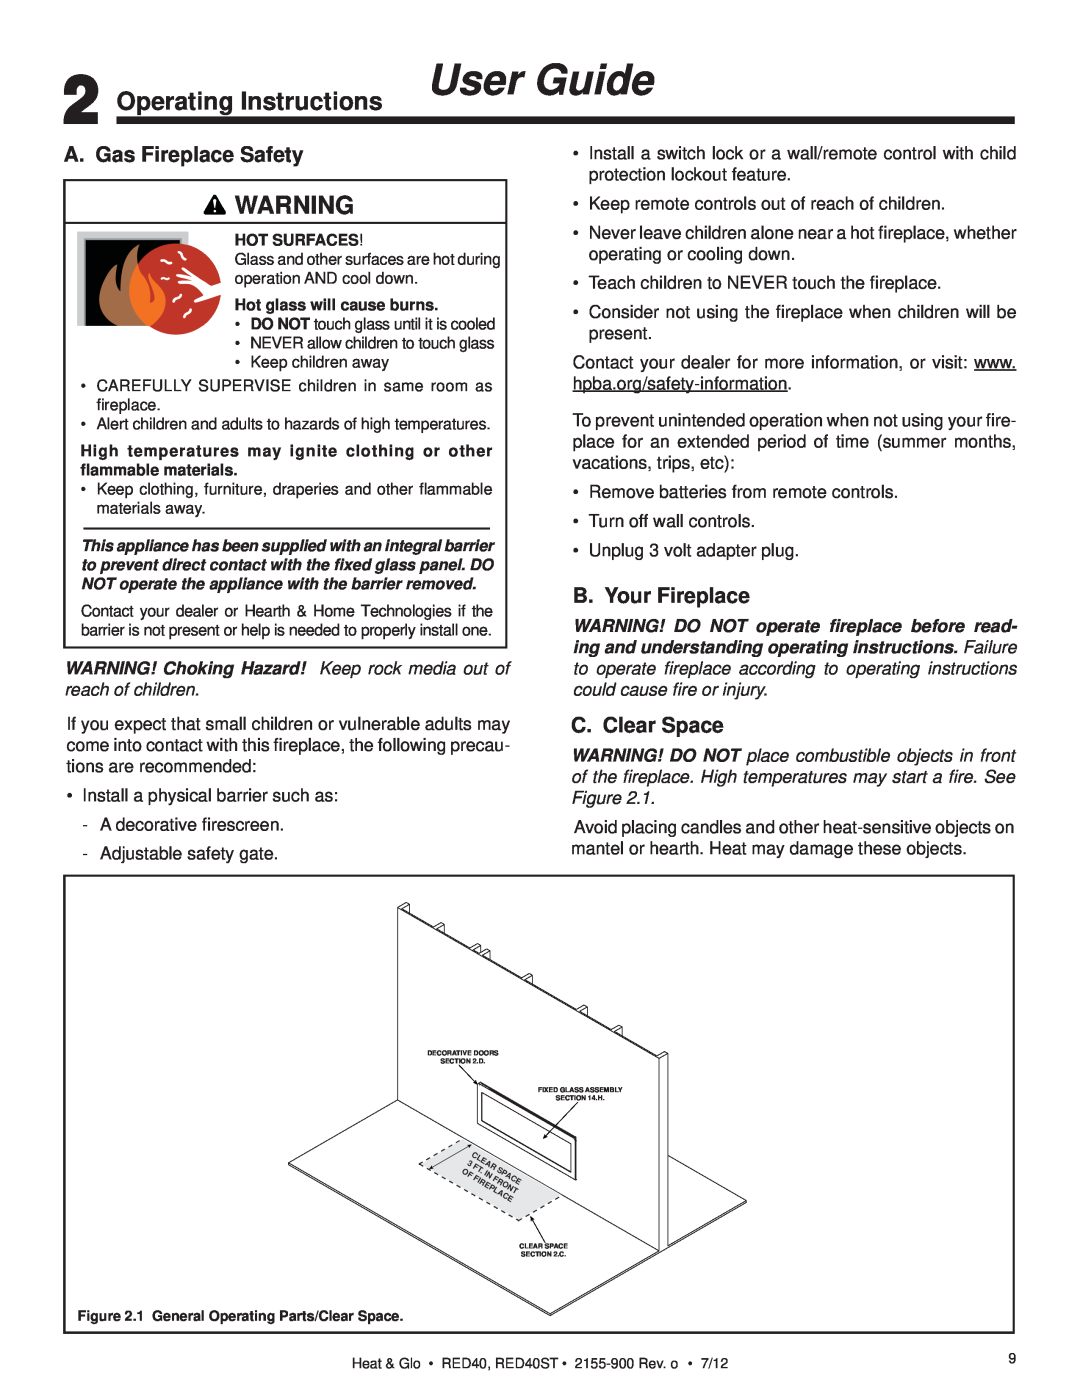 Heat & Glo LifeStyle RED40 Operating Instructions User Guide, A. Gas Fireplace Safety, B. Your Fireplace, C. Clear Space 